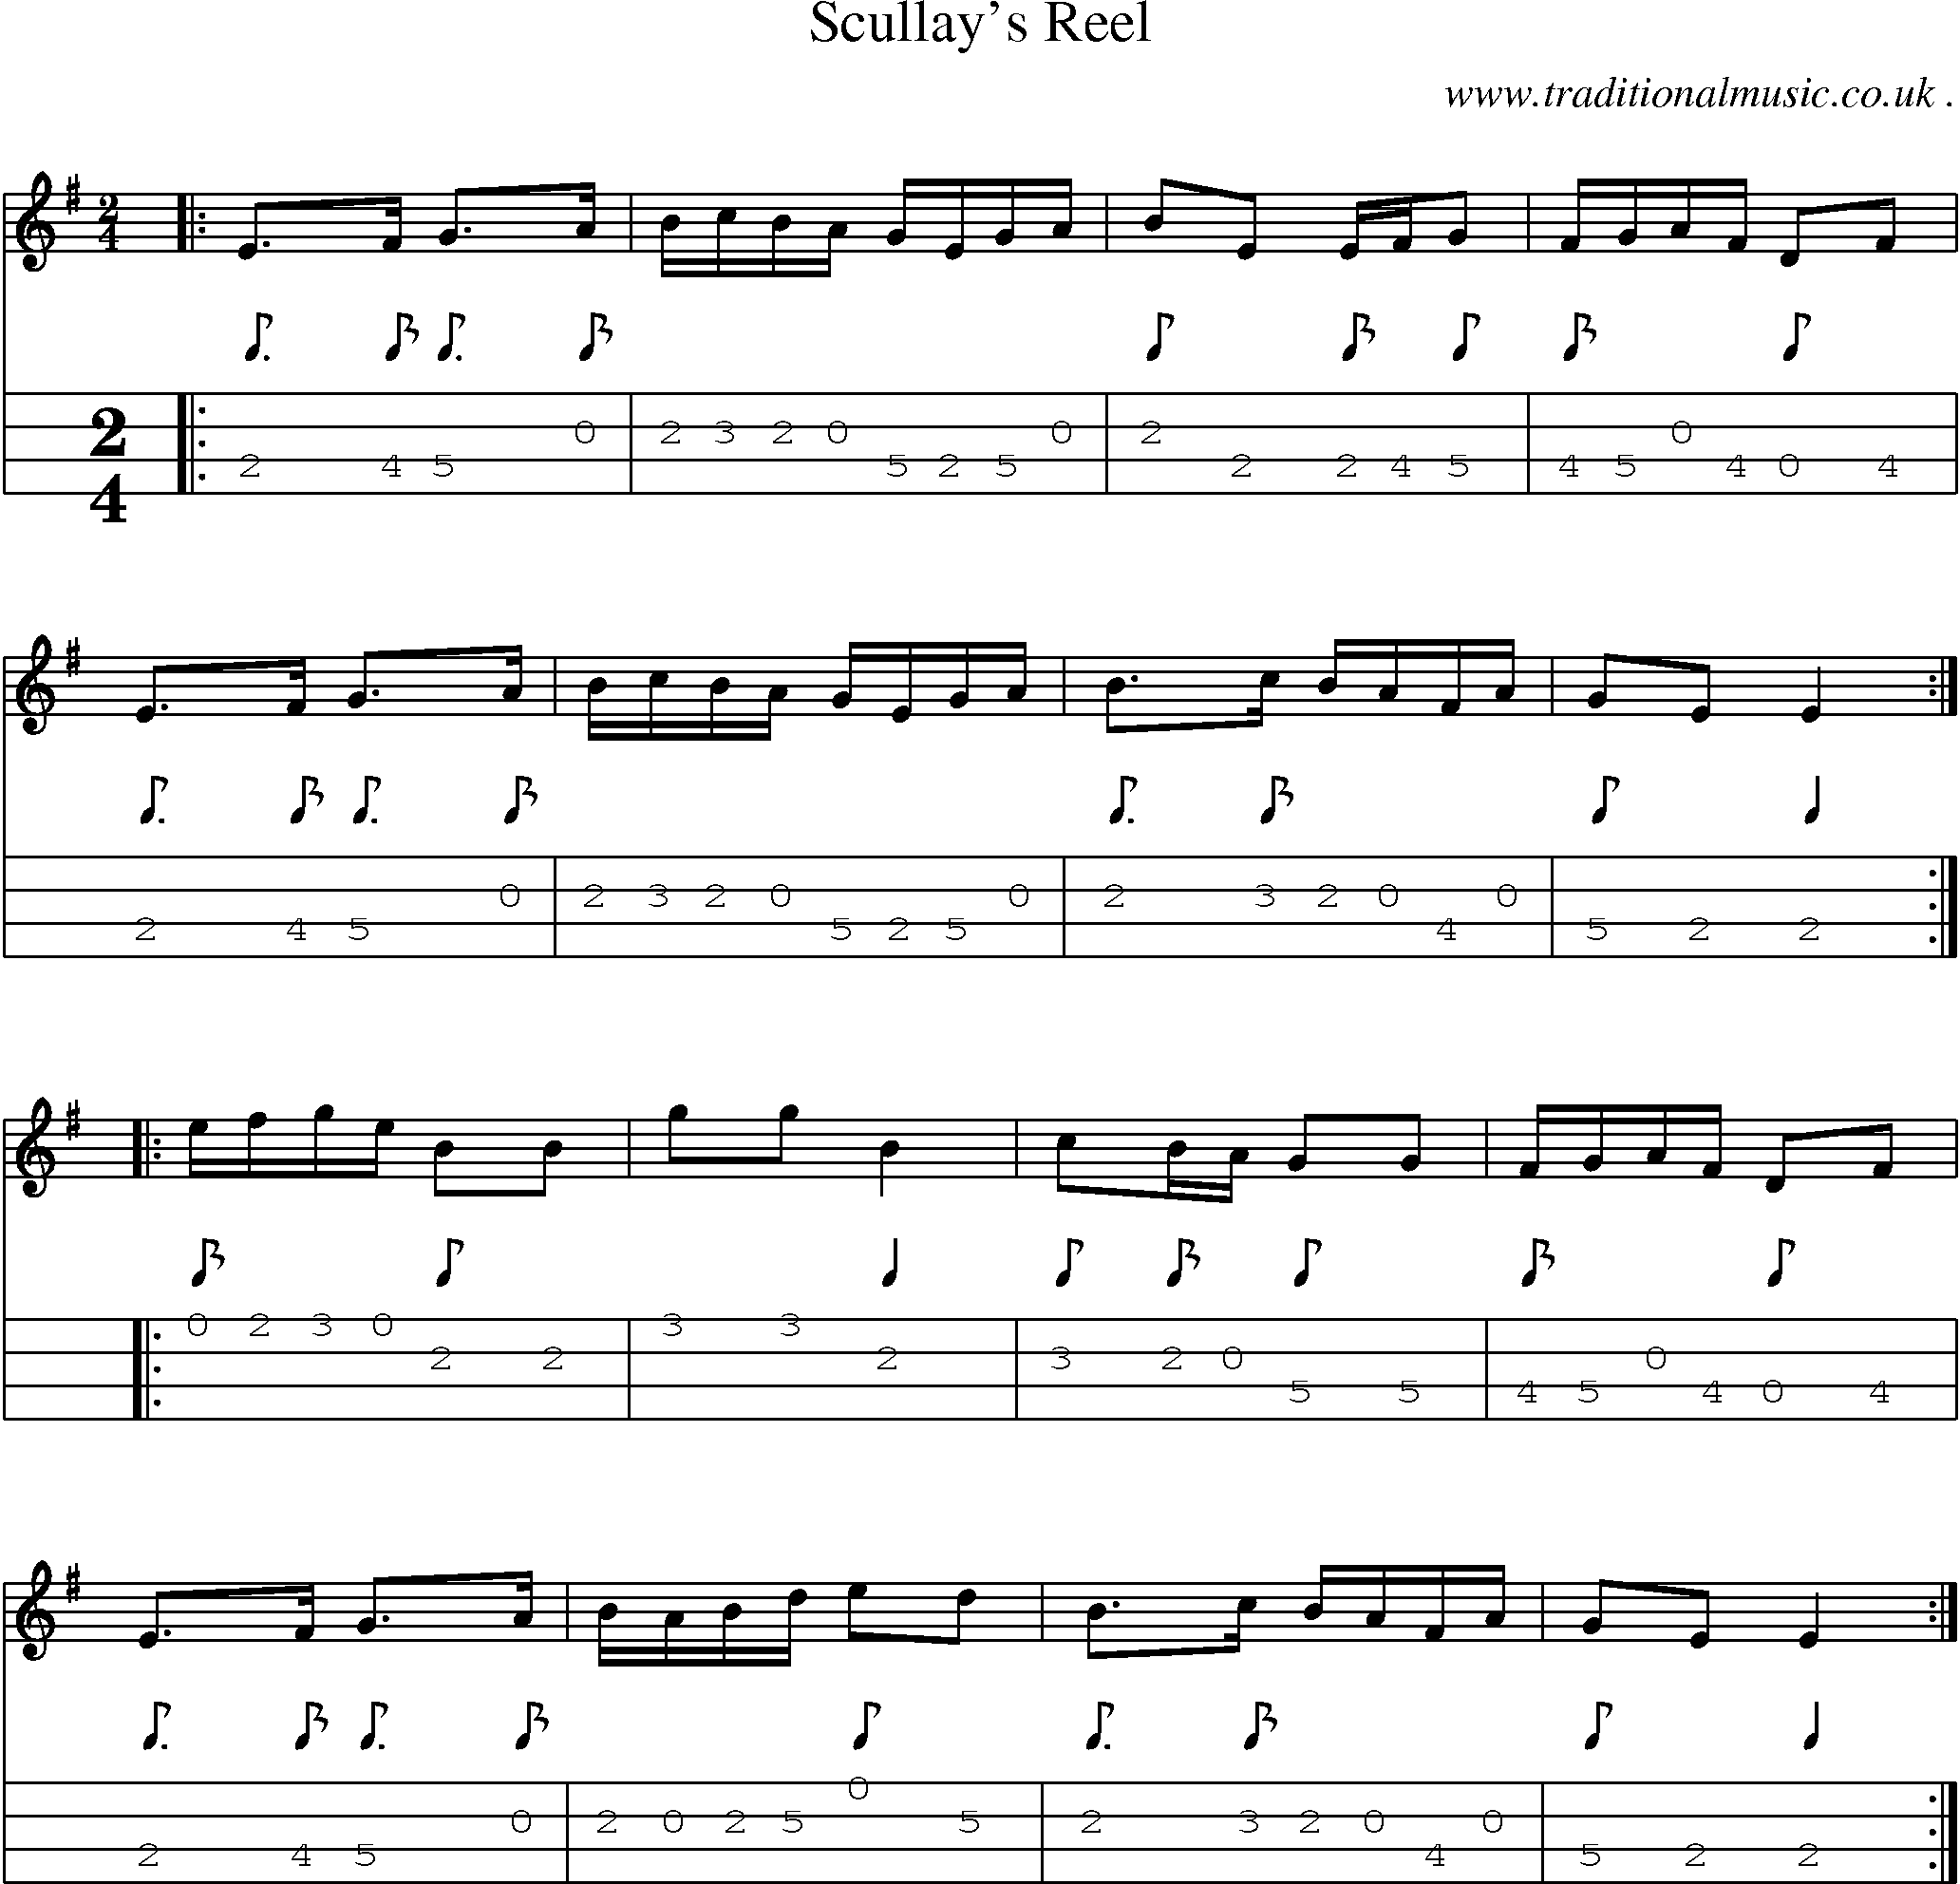 Music Score and Guitar Tabs for Scullays Reel